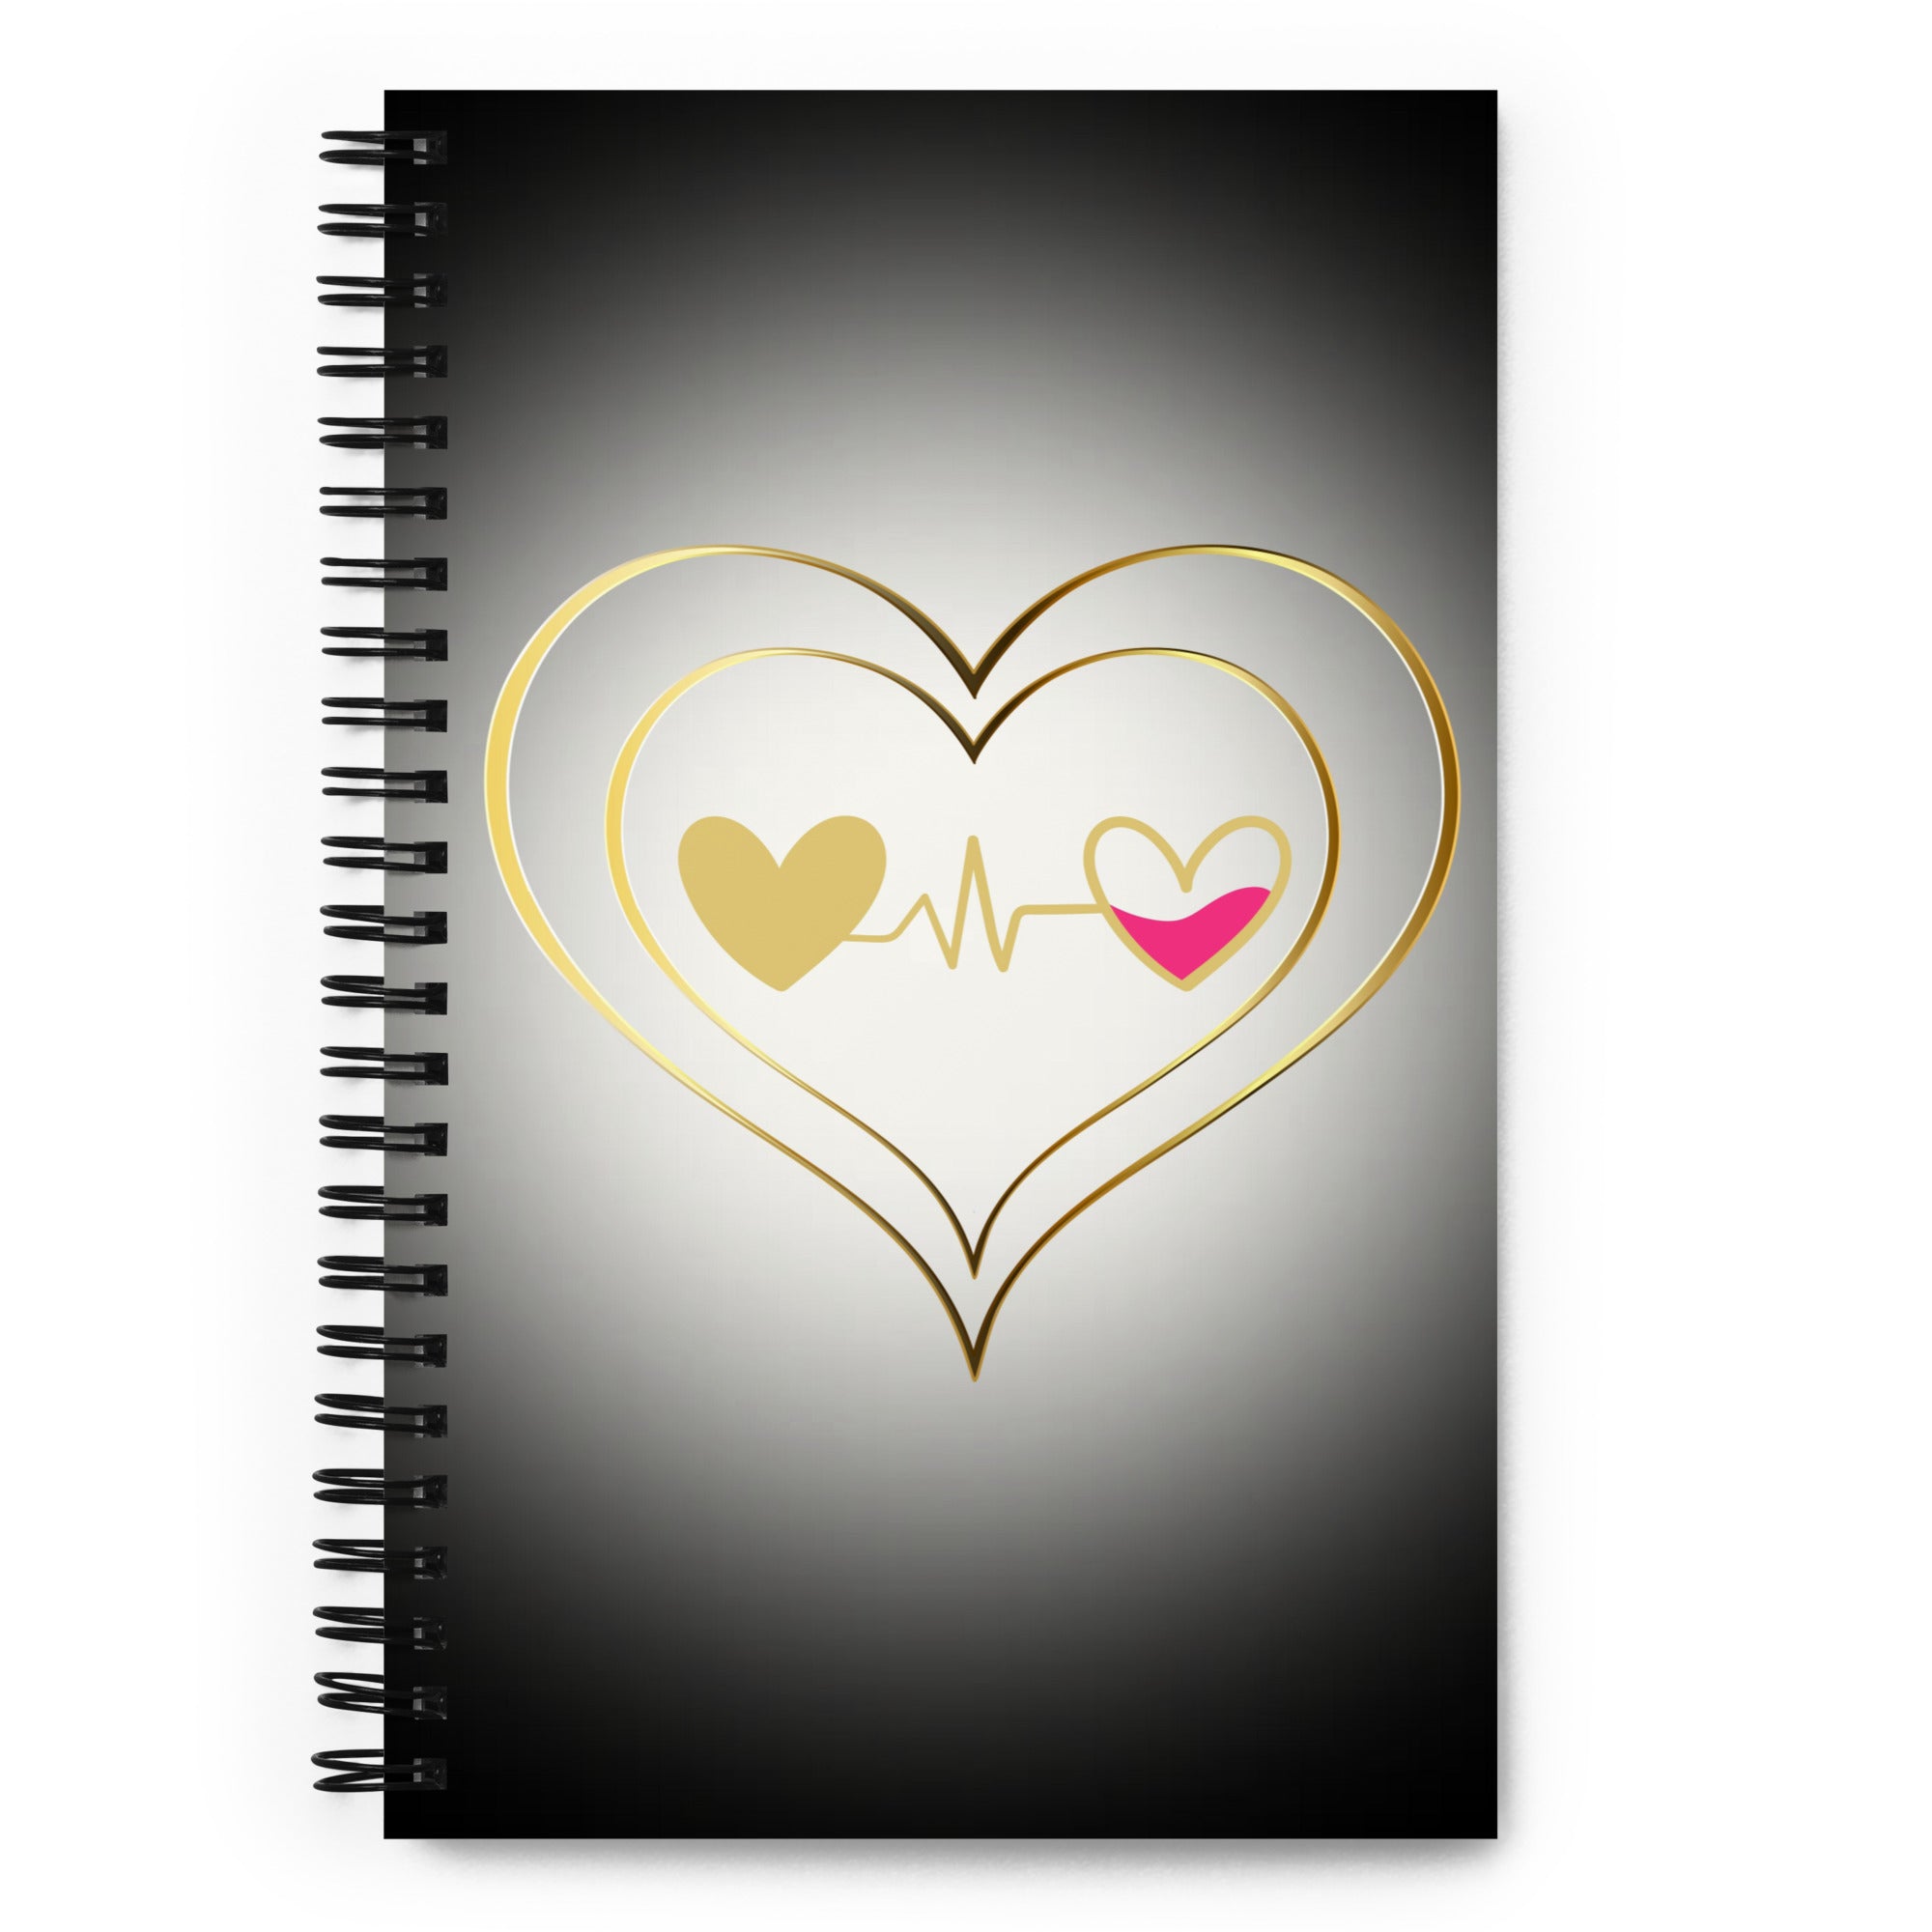 Connected Heart Spiral notebook